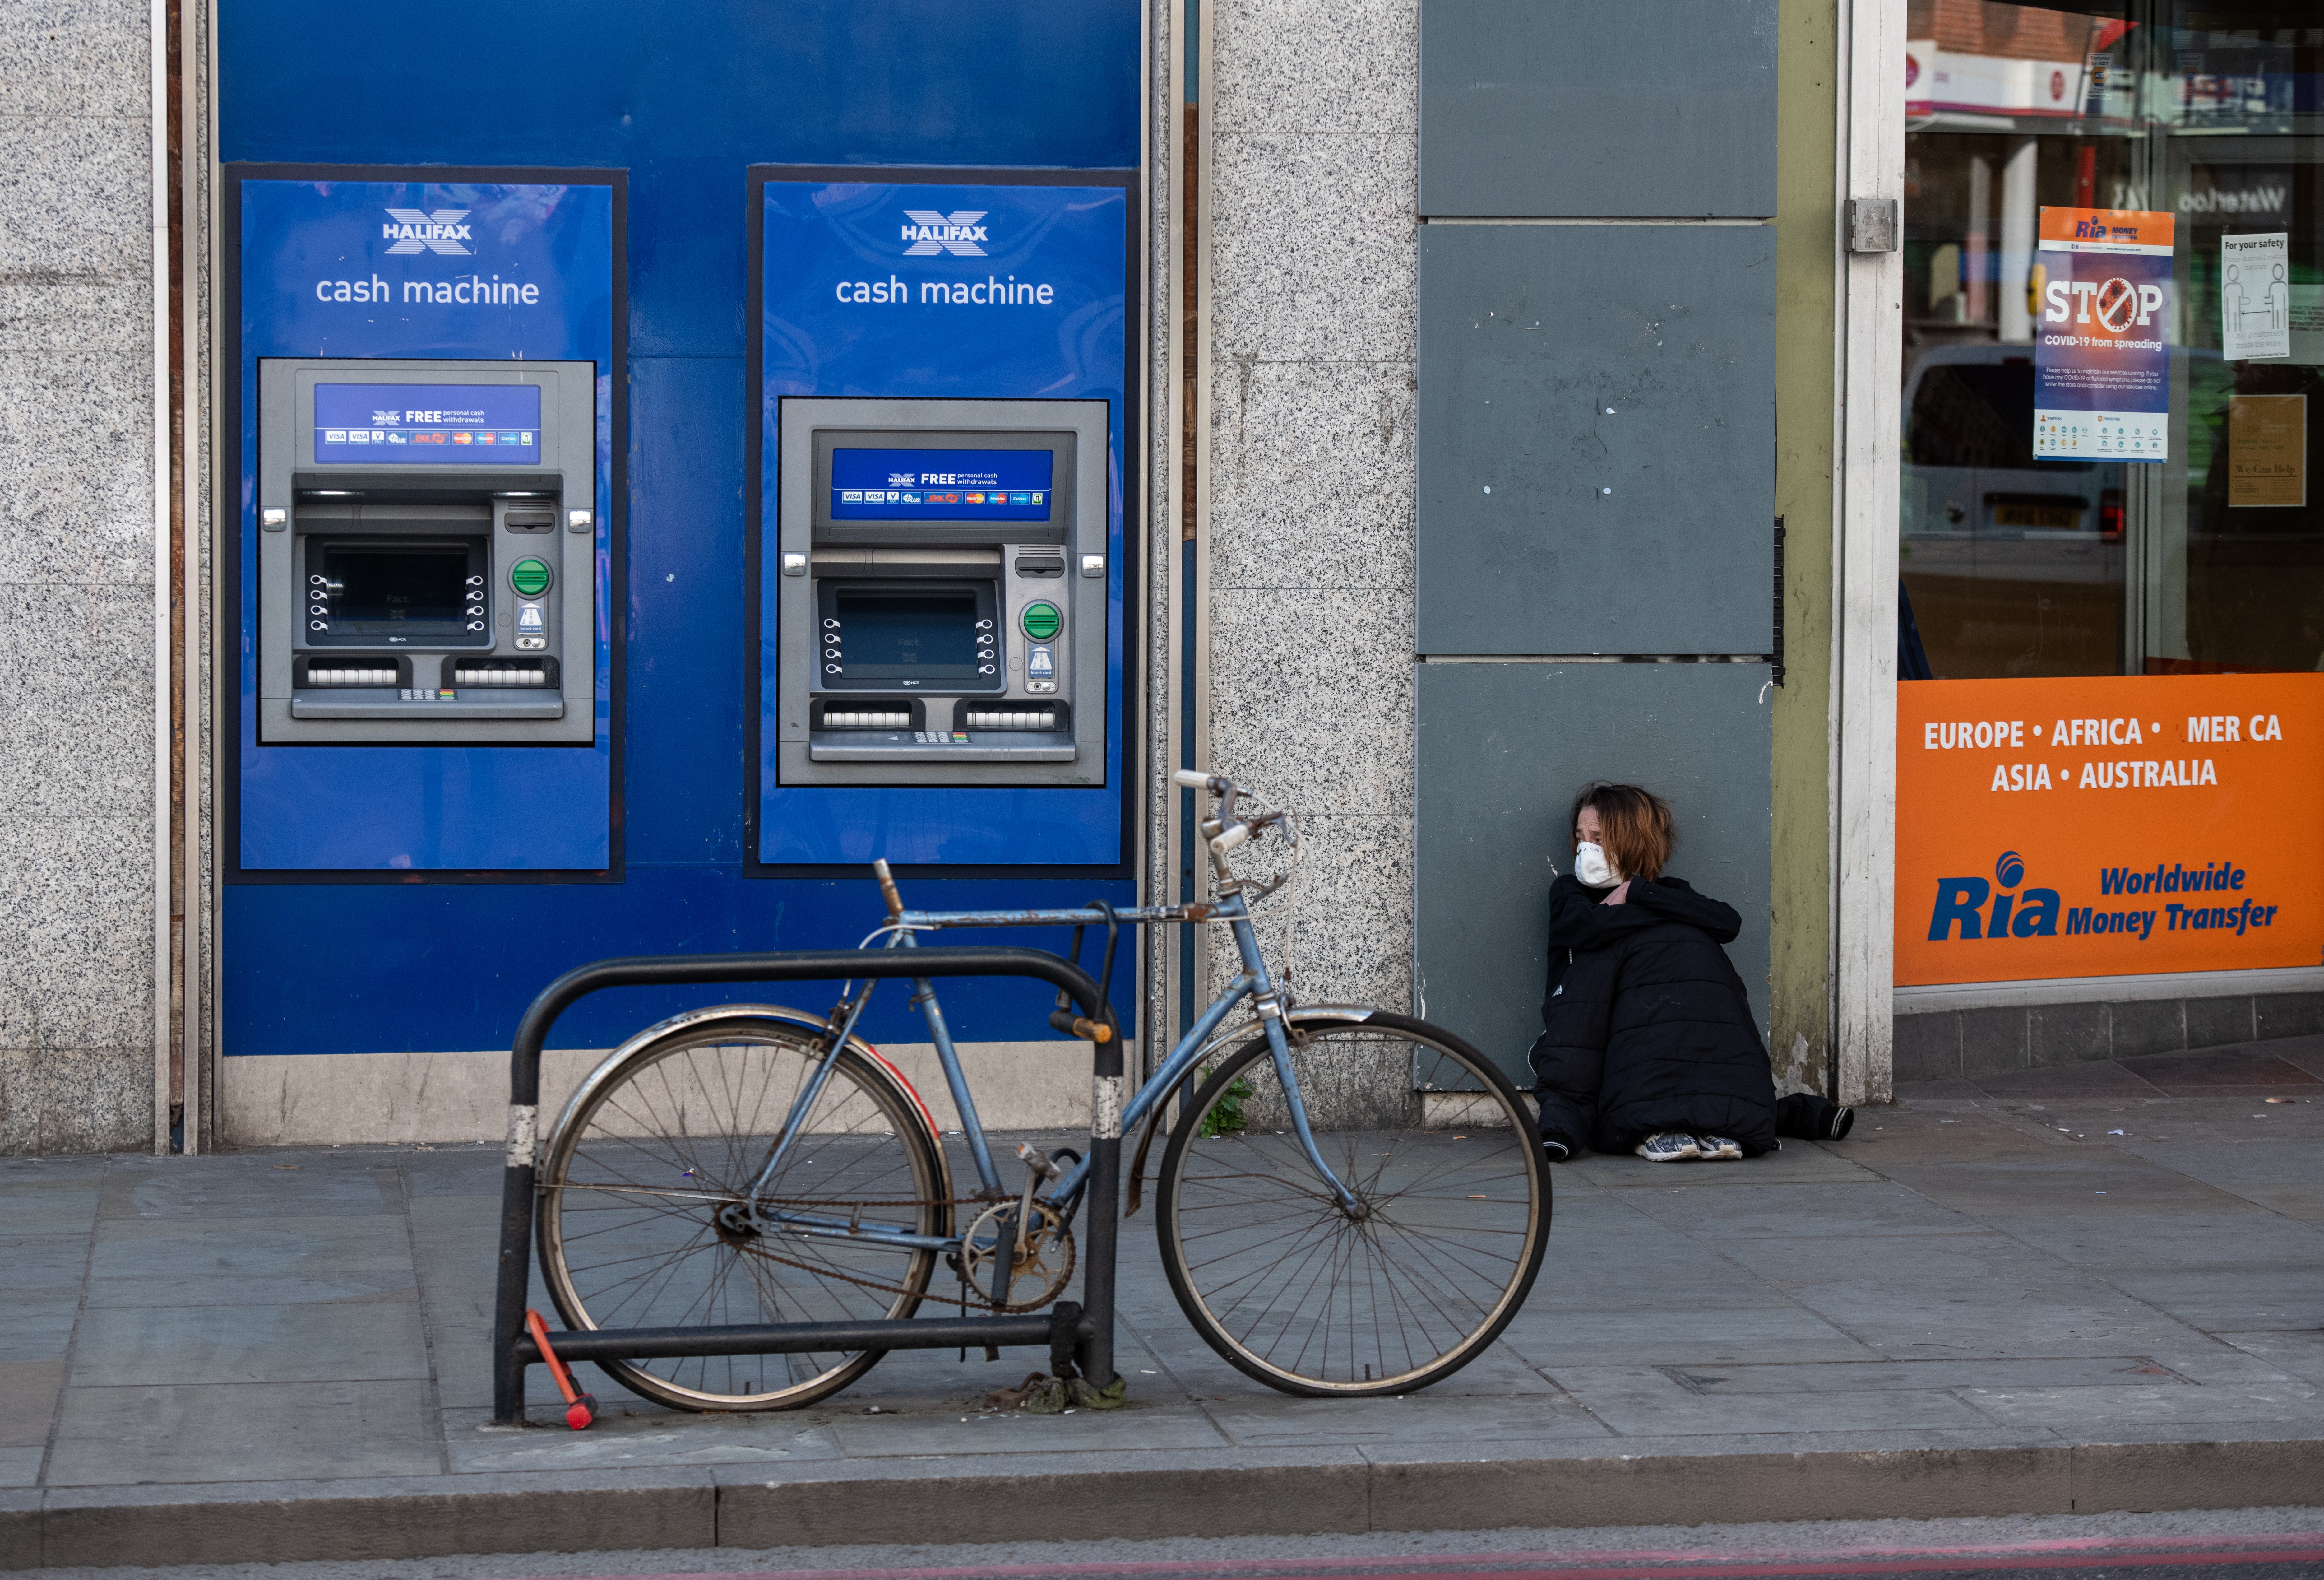 A homeless woman sits next to cash machines in Dalston in east London in April 2020